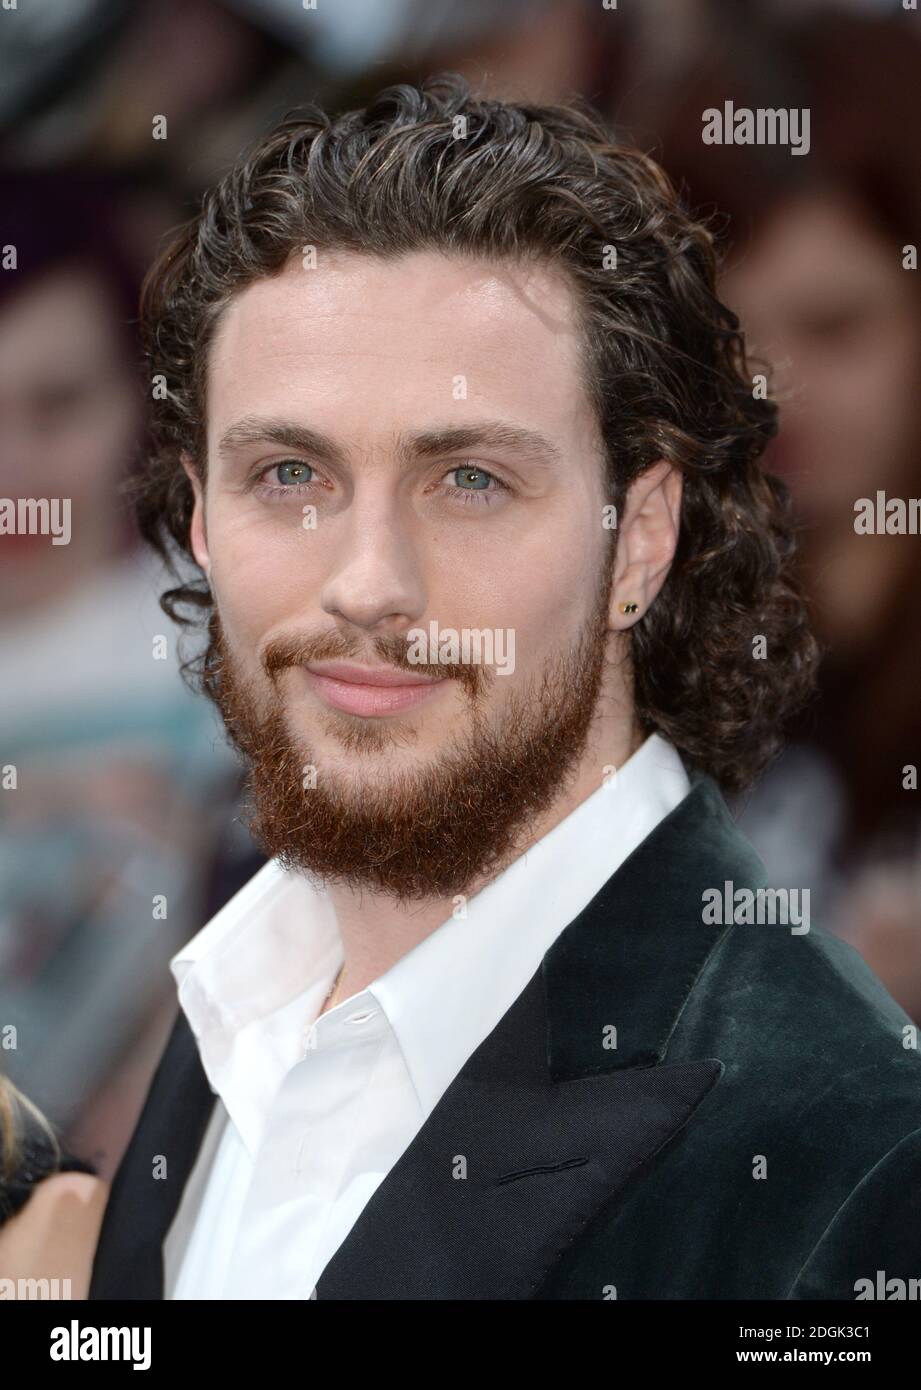 Aaron Taylor-Johnson (Pietro Maximoff/ Quicksilver) attending Marvel Avengers: The Age Of Ultron European Film Premiere held at the VUE cinema in Westfield, London Stock Photo